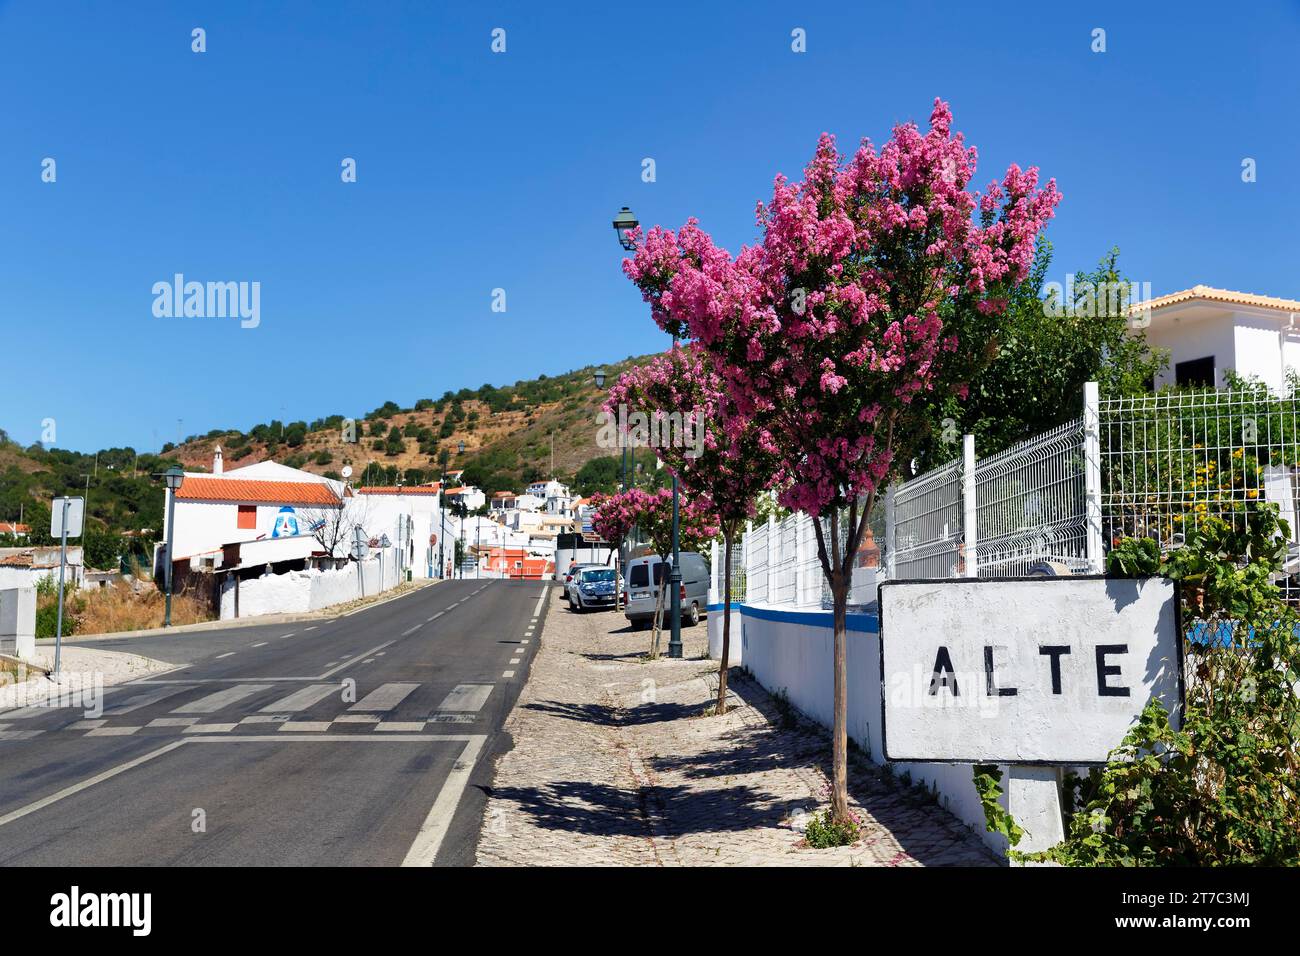 Entrance to town, sign with Alte lettering, Loule, Algarve, Portugal Stock Photo